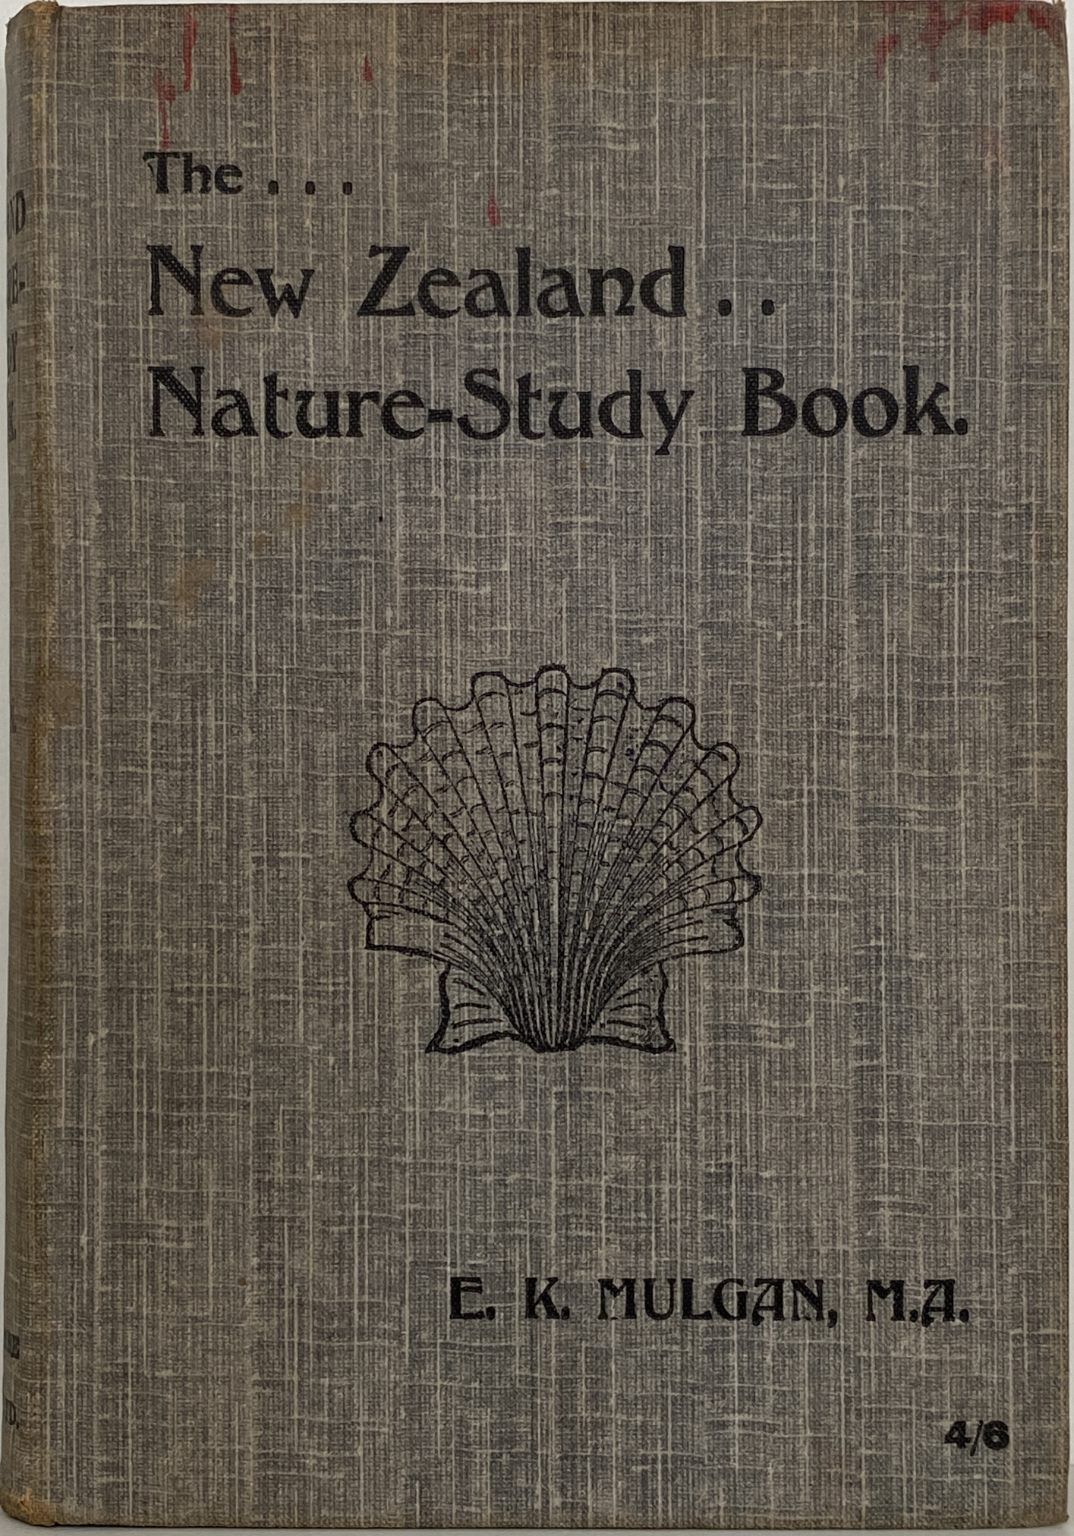 THE NEW ZEALAND NATURE STUDY BOOK